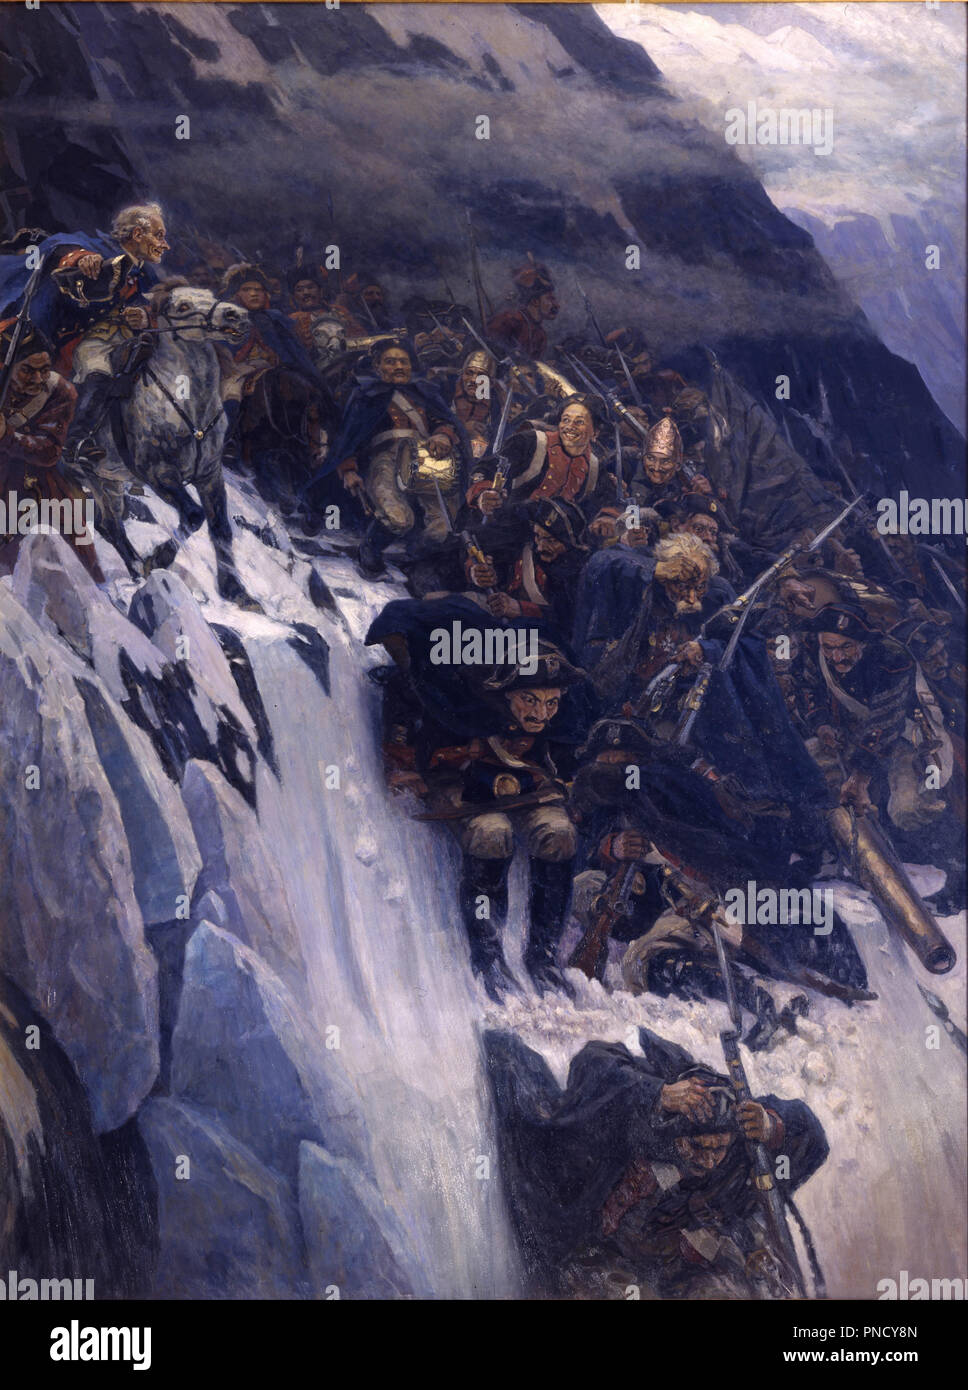 1799 Suvorov Crossing the Alps in 1799. Date/Period: 1899. Painting. Oil on canvas Oil on canvas. Height: 4,950 mm (16.24 ft); Width: 3,730 mm (12.23 ft). Author: Vasily Surikov. VASSILY IVANOVICH SURIKOV. Surikov, Vasili Ivanovich. Stock Photo